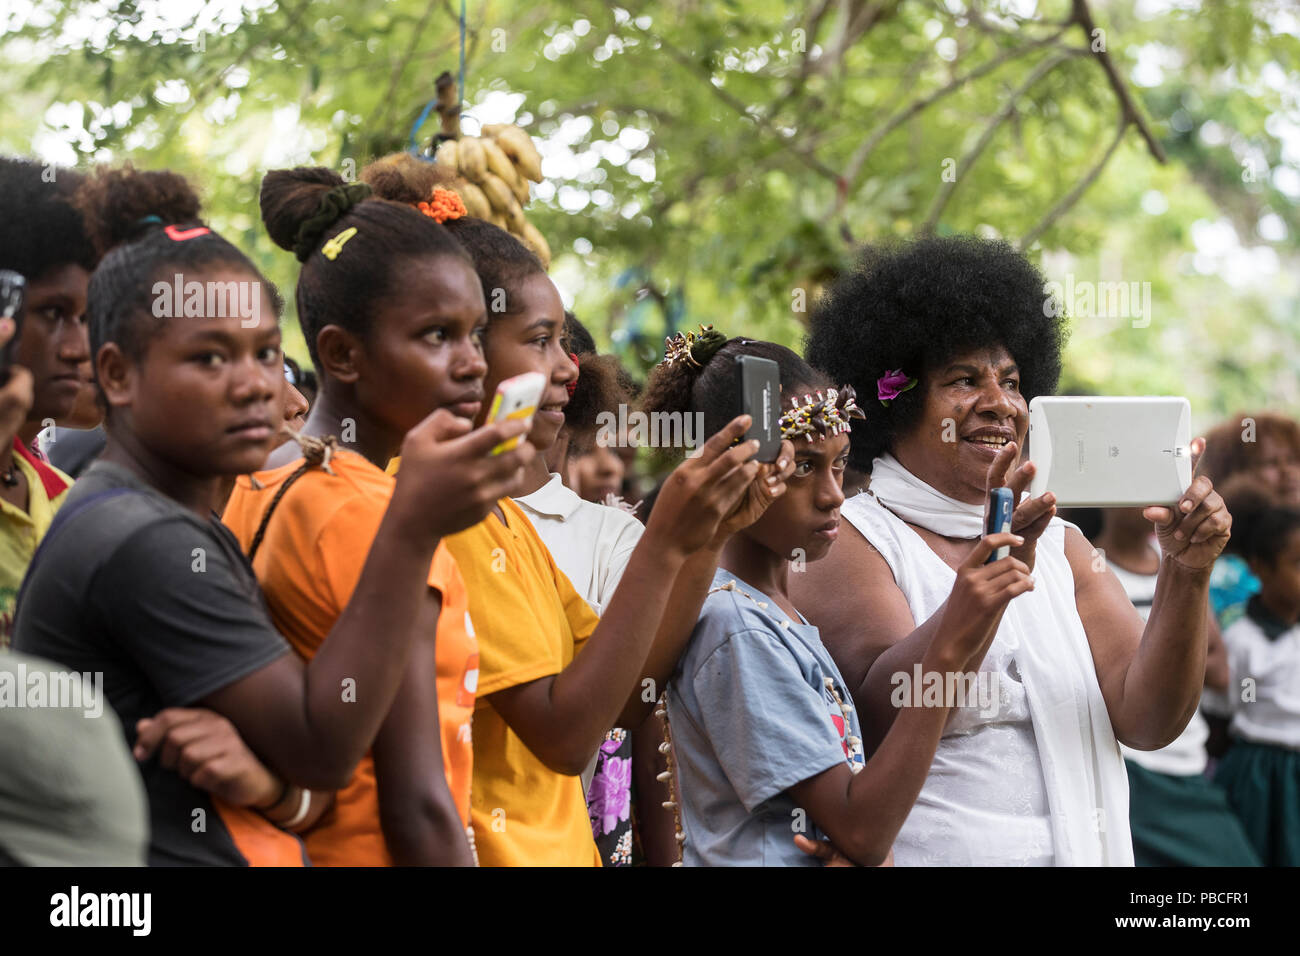 Local People on Mobile Phones and Tablets in Papua New Guinea Stock Photo